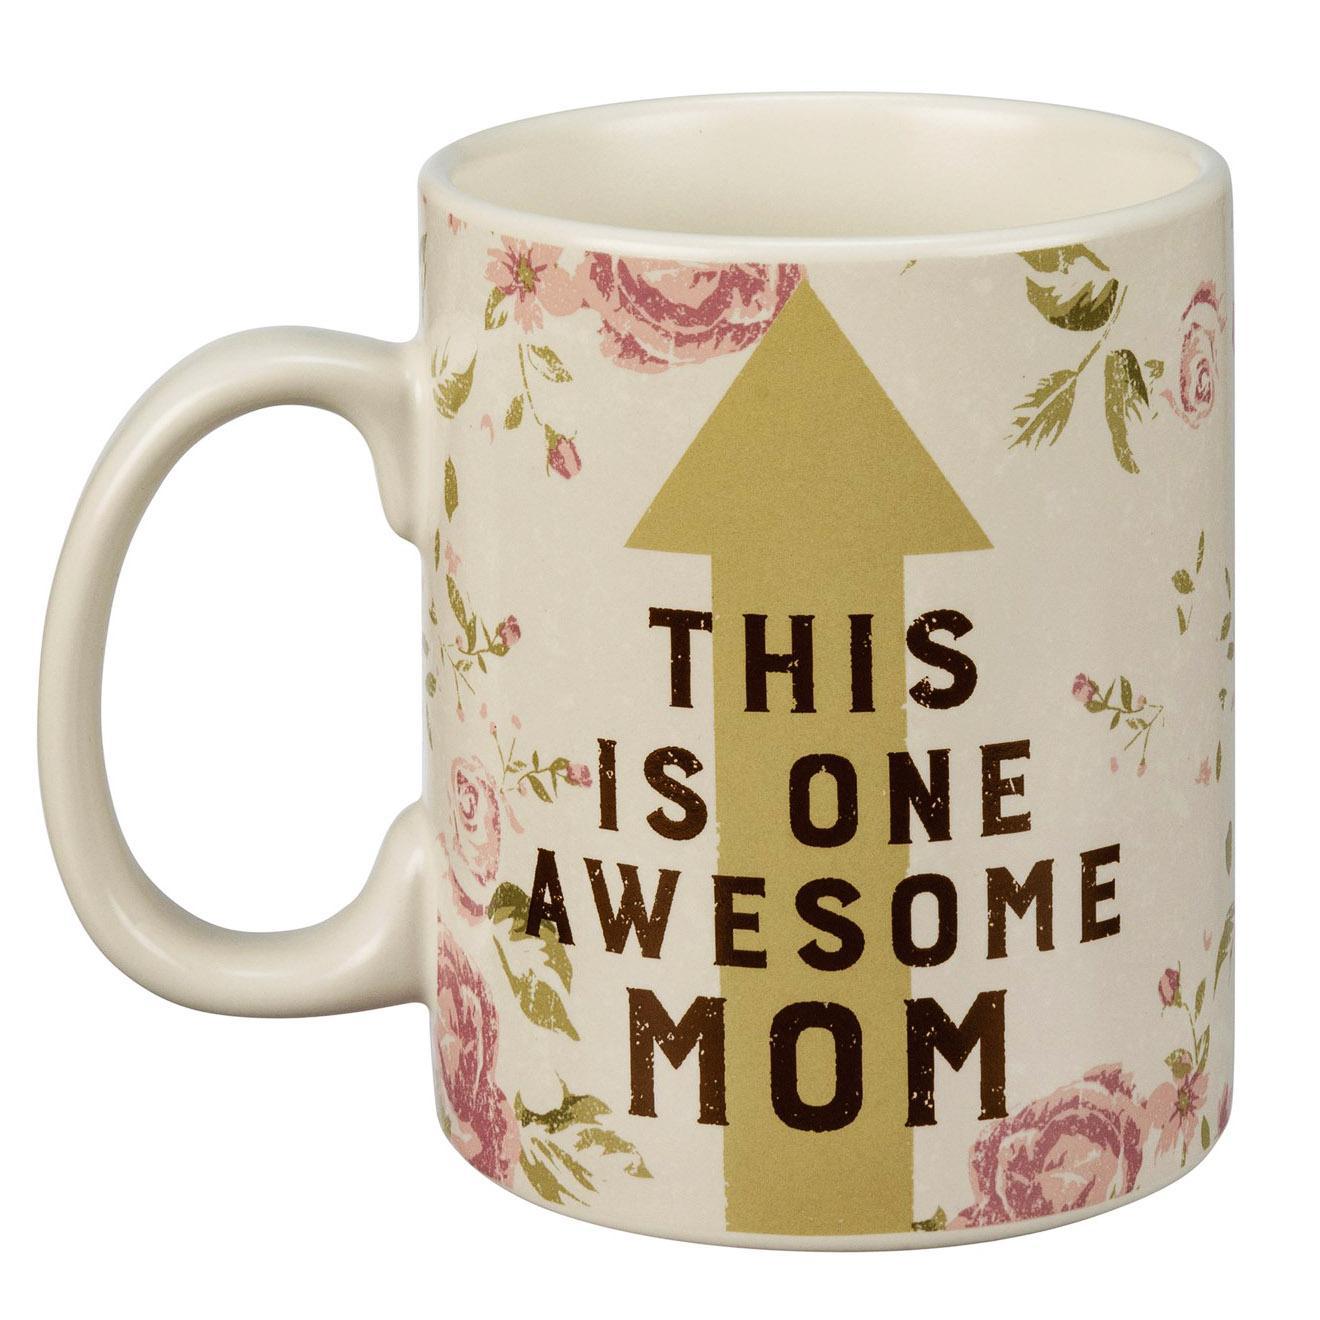 This Is One Awesome Mom Mug: Rustic Stoneware Coffee Cup